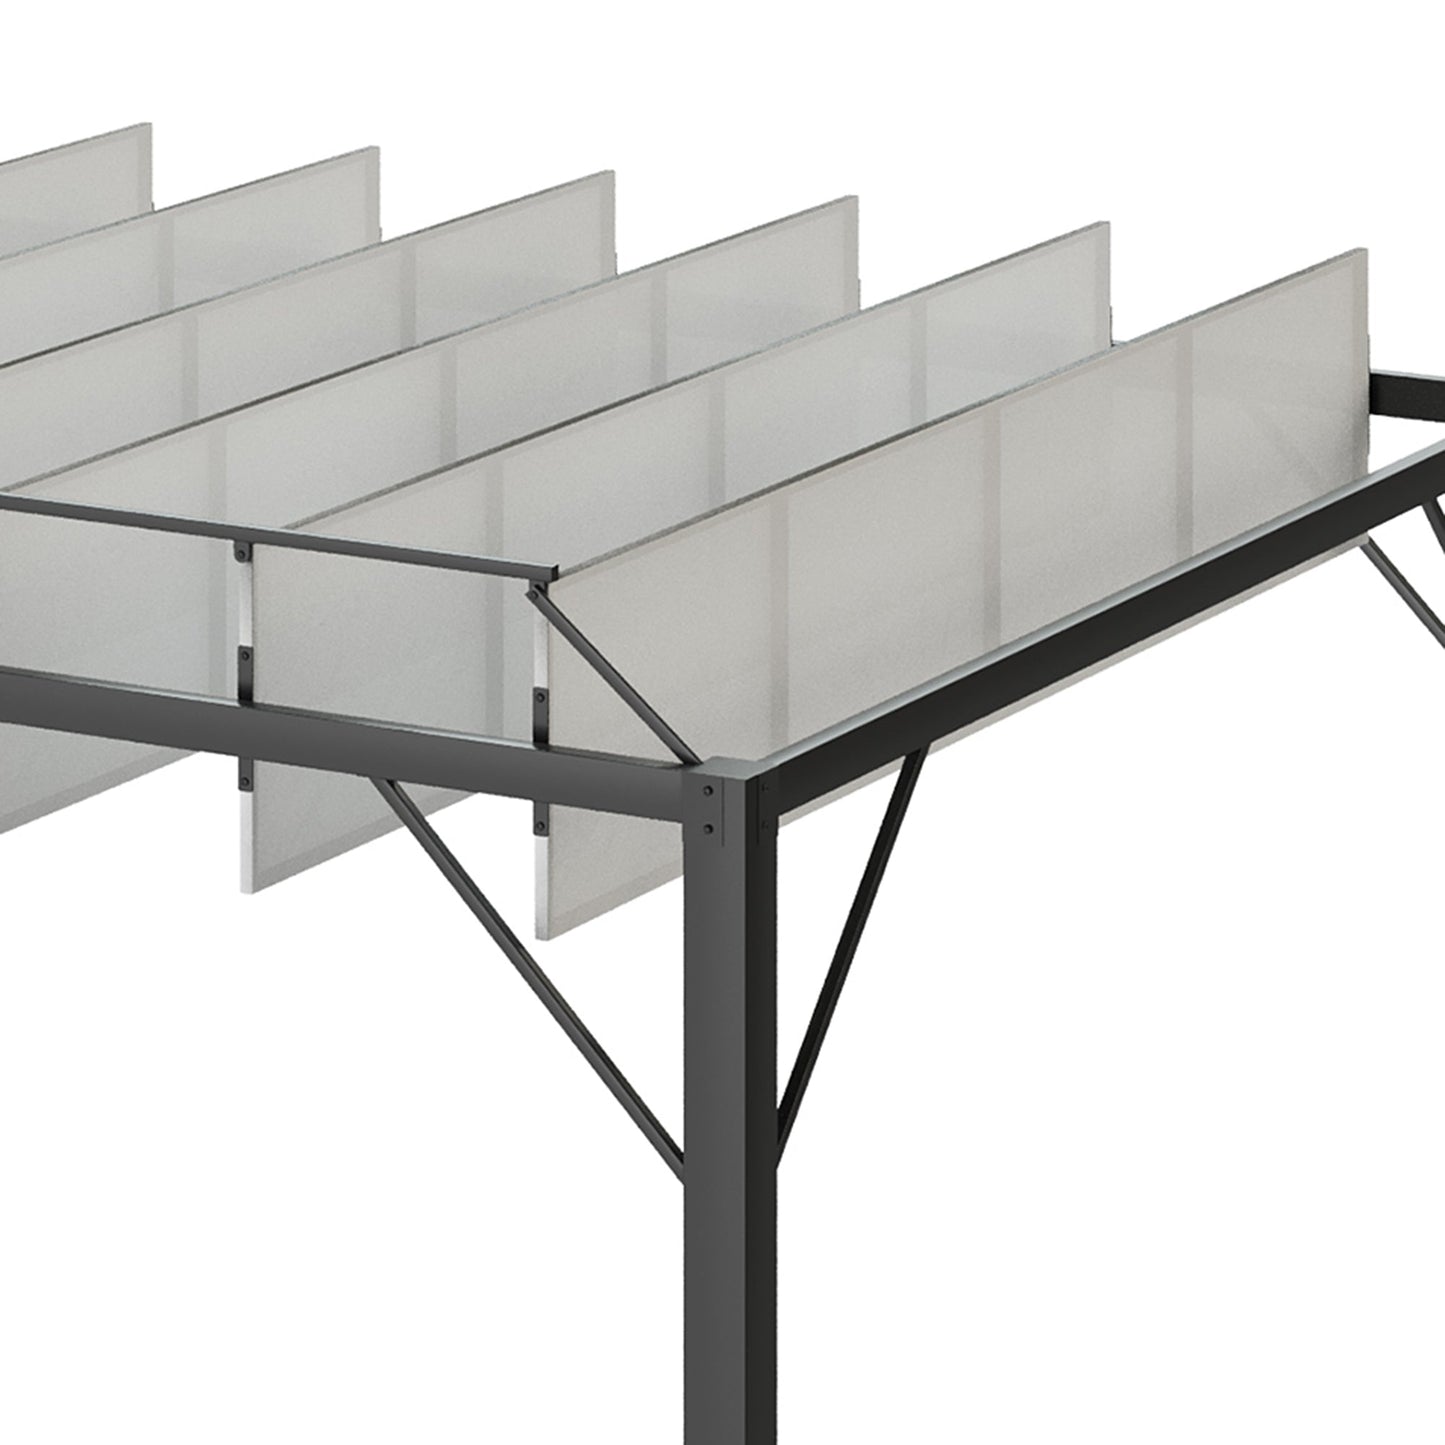 Outdoor Louvered Pergola 9.5' x 8' Aluminum Patio Gazebo Sun Shade Shelter with Adjustable Breathable Mesh Roof, White at Gallery Canada